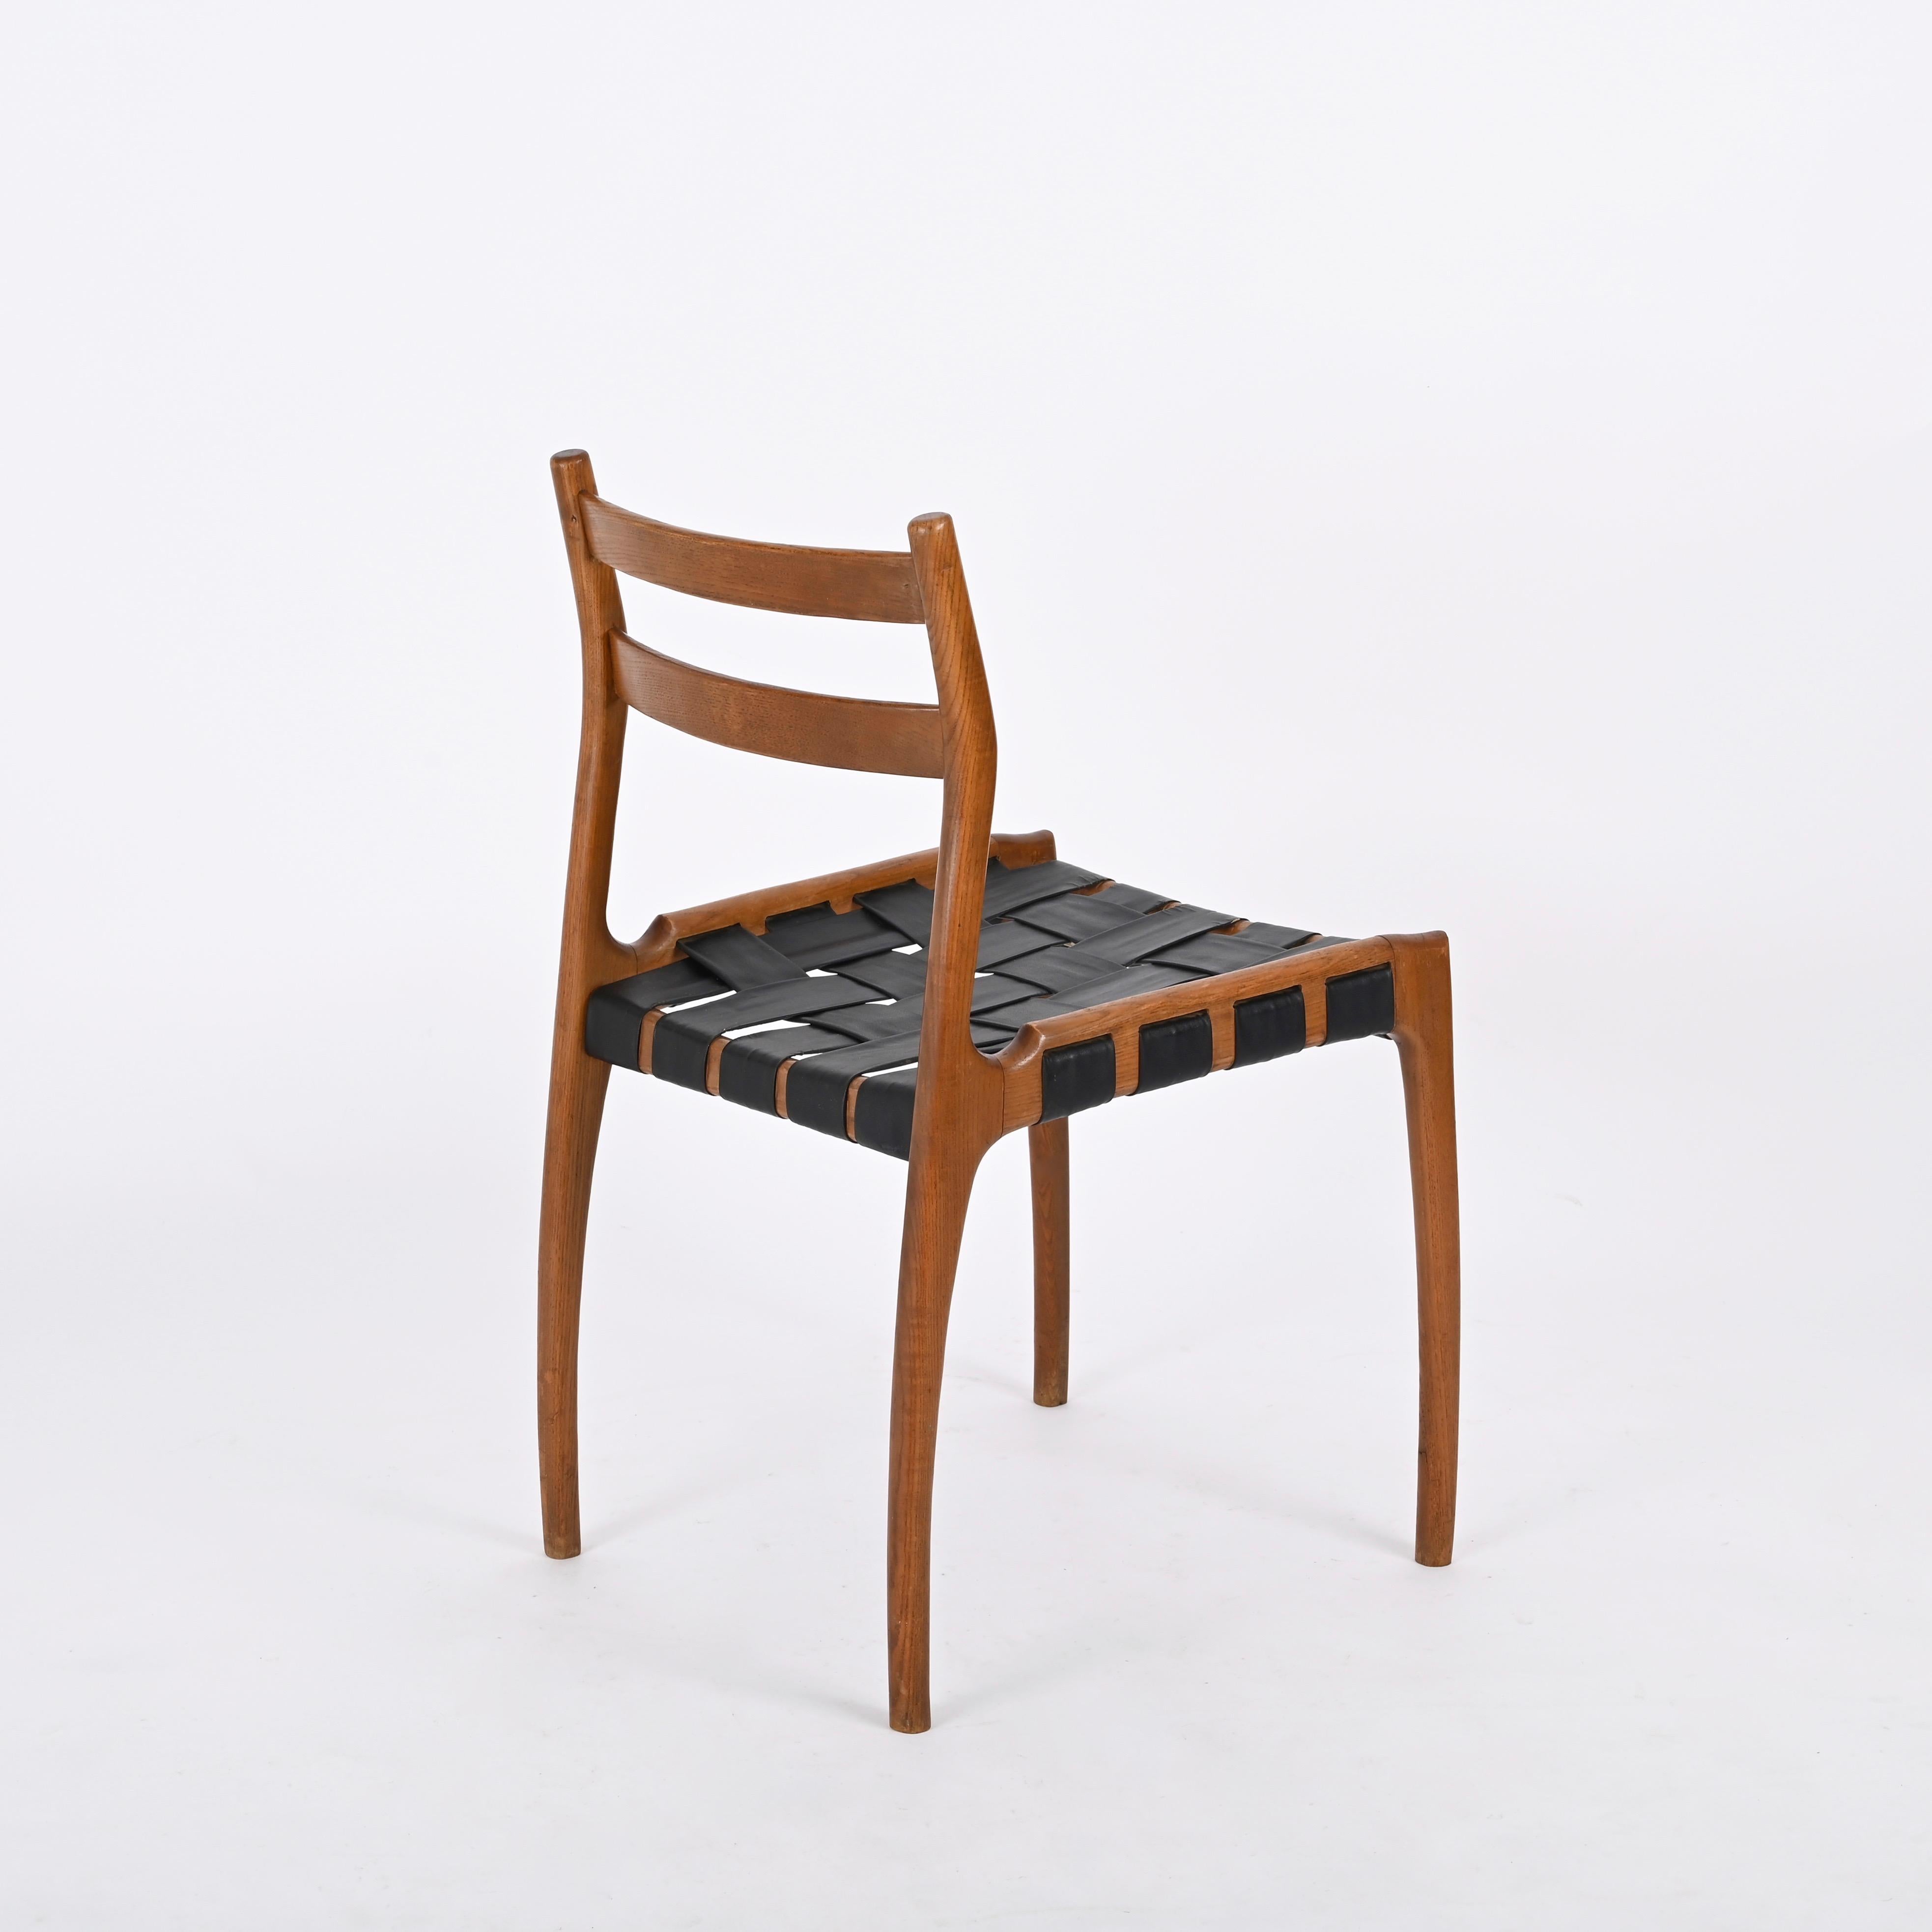 Italian Mid-Century Chair in Oak and Leather by Palange for Montina, 1960s For Sale 6